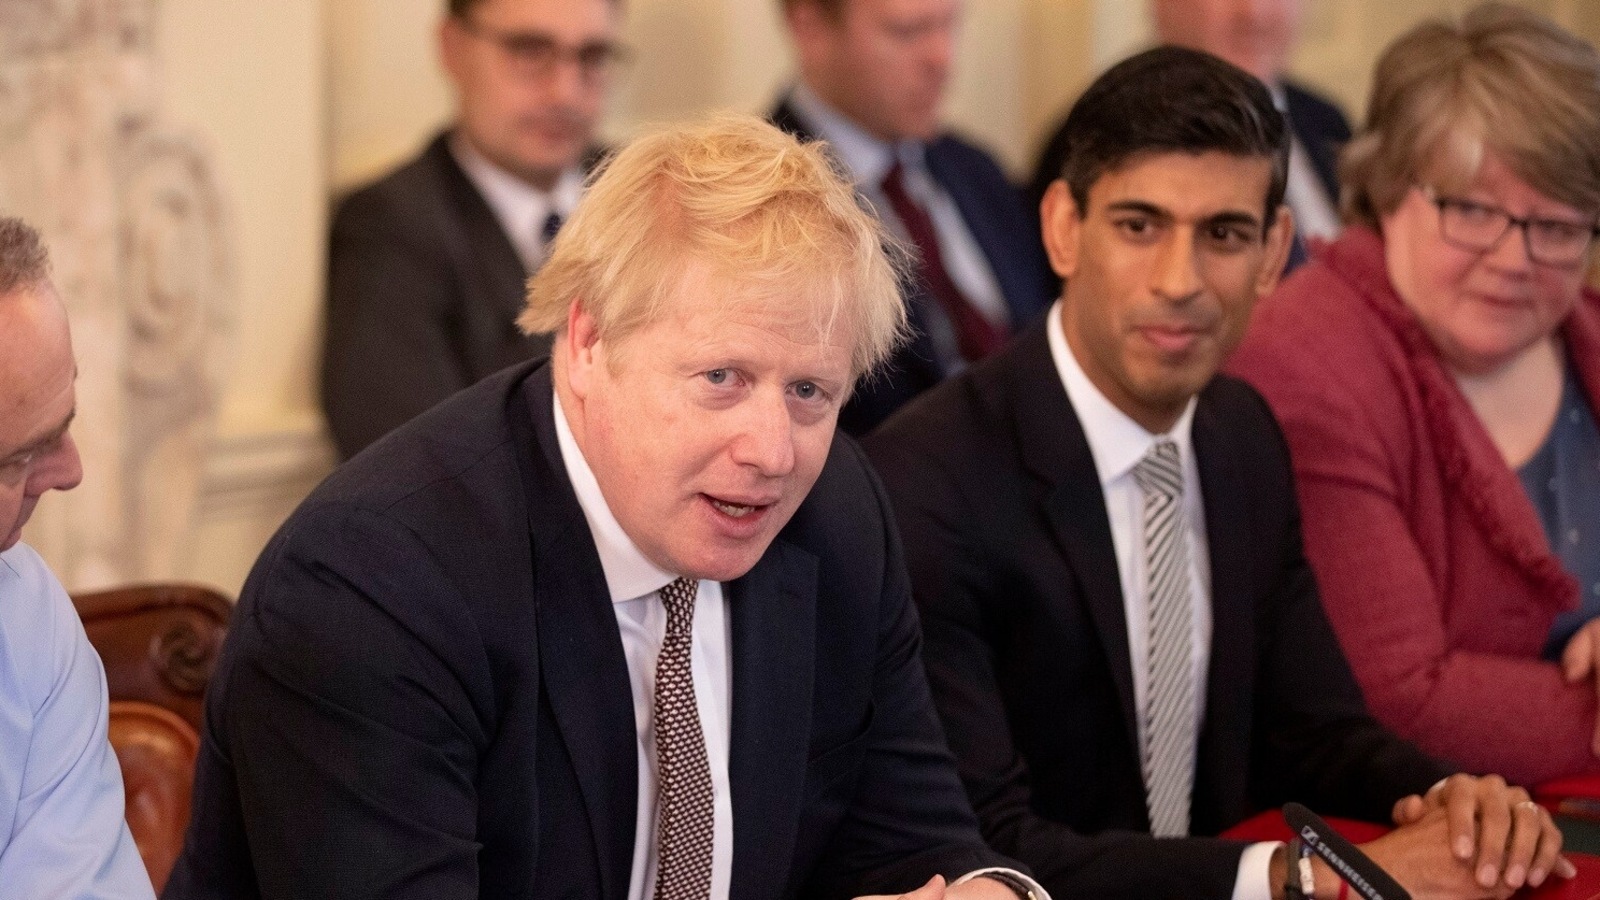 rishi-sunak-becomes-uk-pm-wishes-pour-in-johnson-gives-wholehearted-support